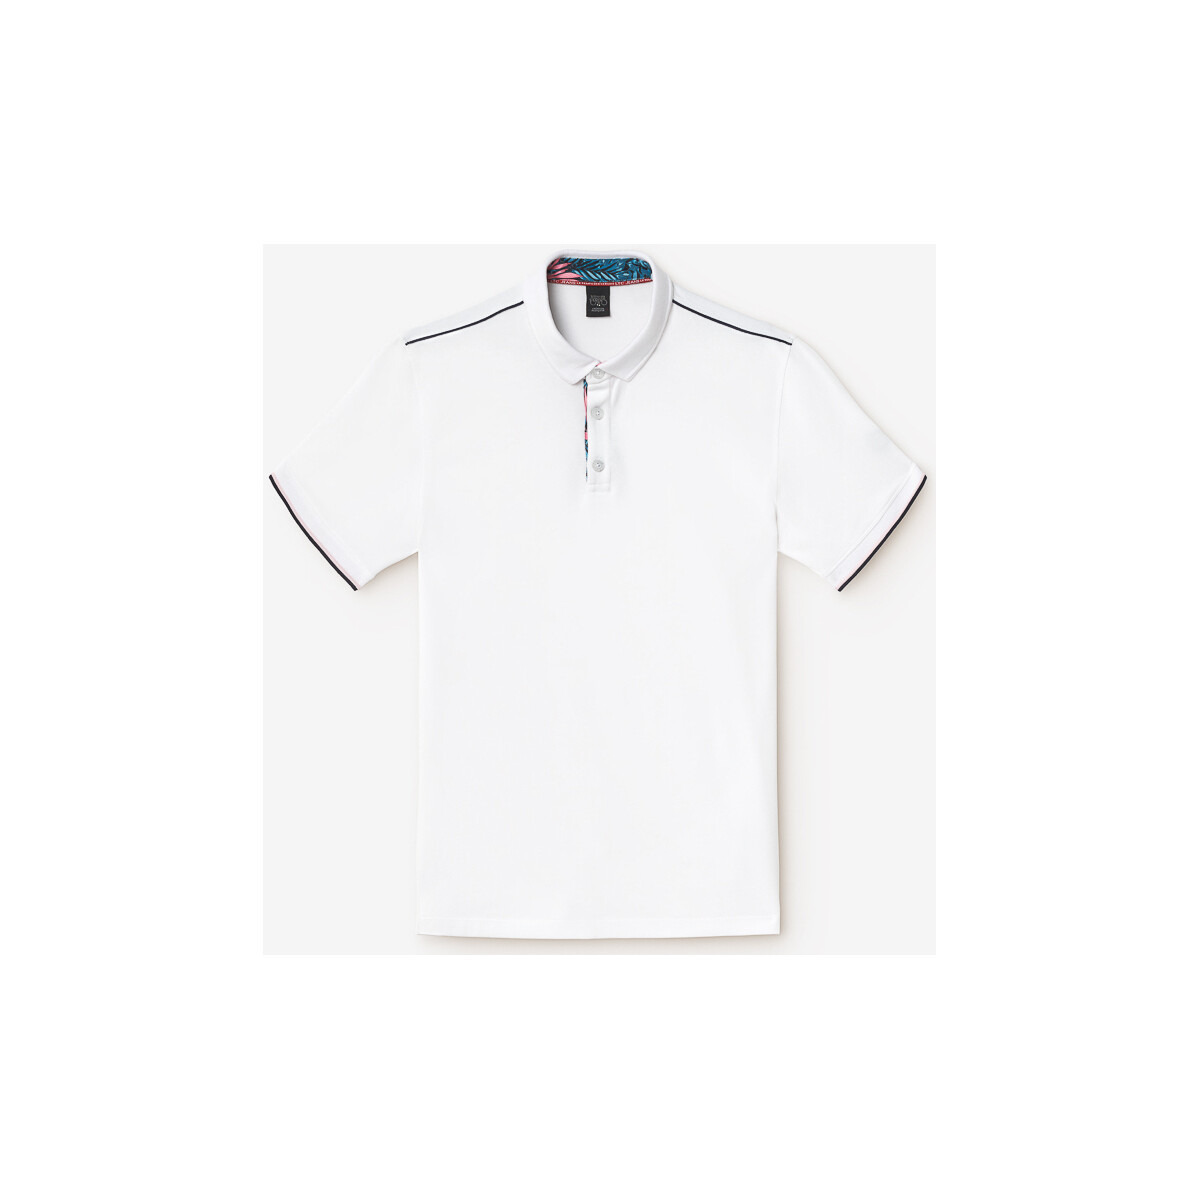 Gents Poloshirt in White at Spartoo GOOFASH